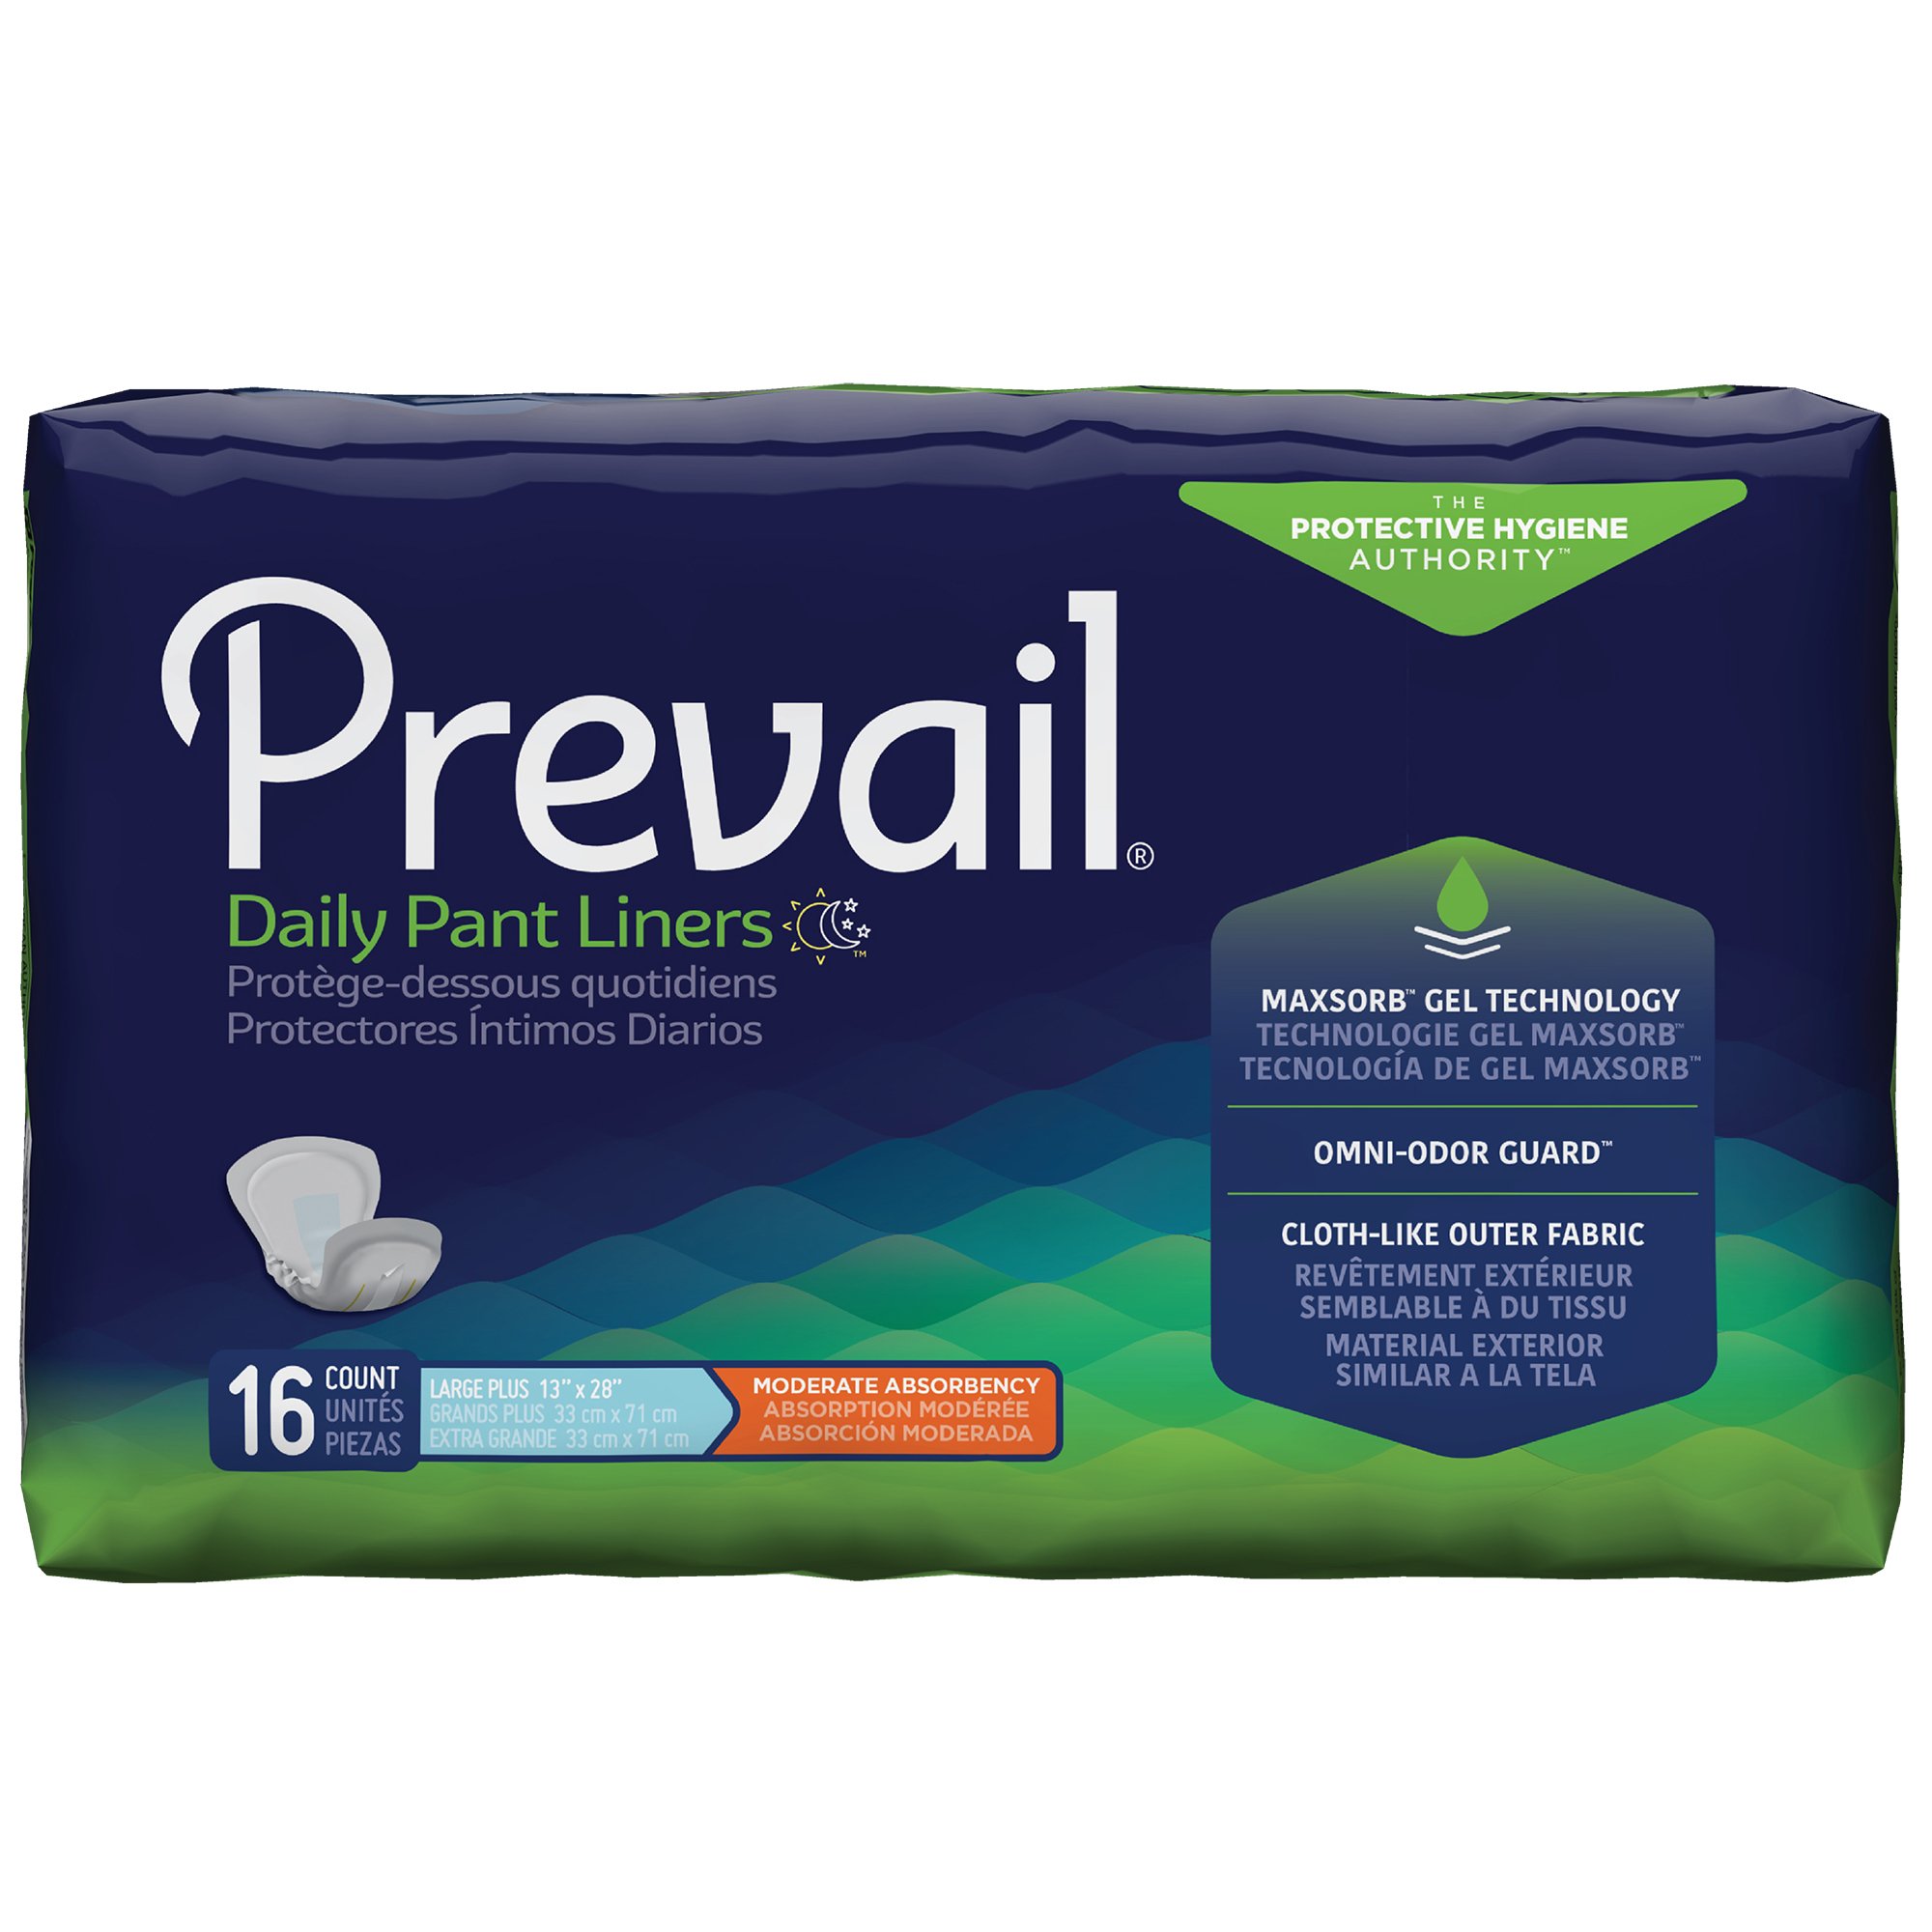 Prevail Daily Pant Liners Moderate Absorbency Incontinence Liner, 28-Inch Length